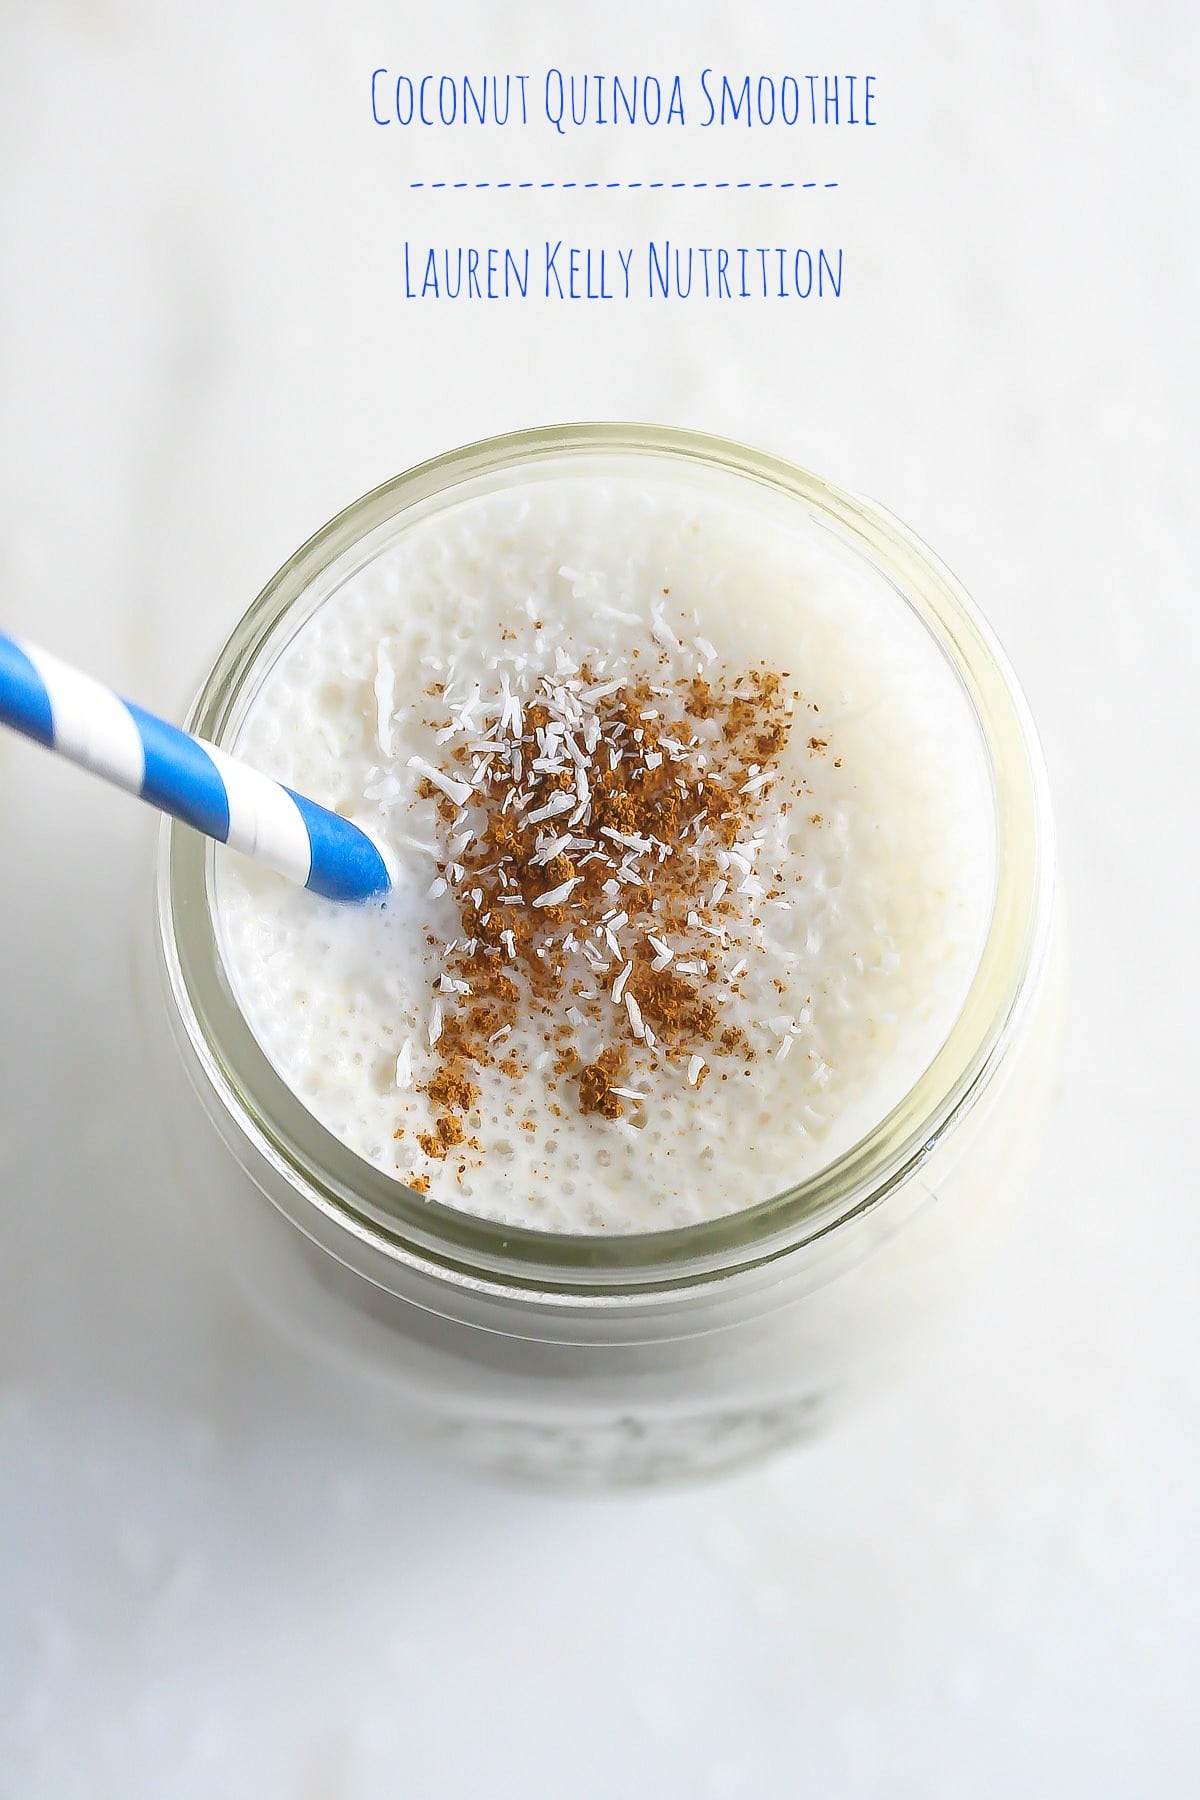 Overhead picture of coconut quinoa smoothie with a blue and white striped straw.